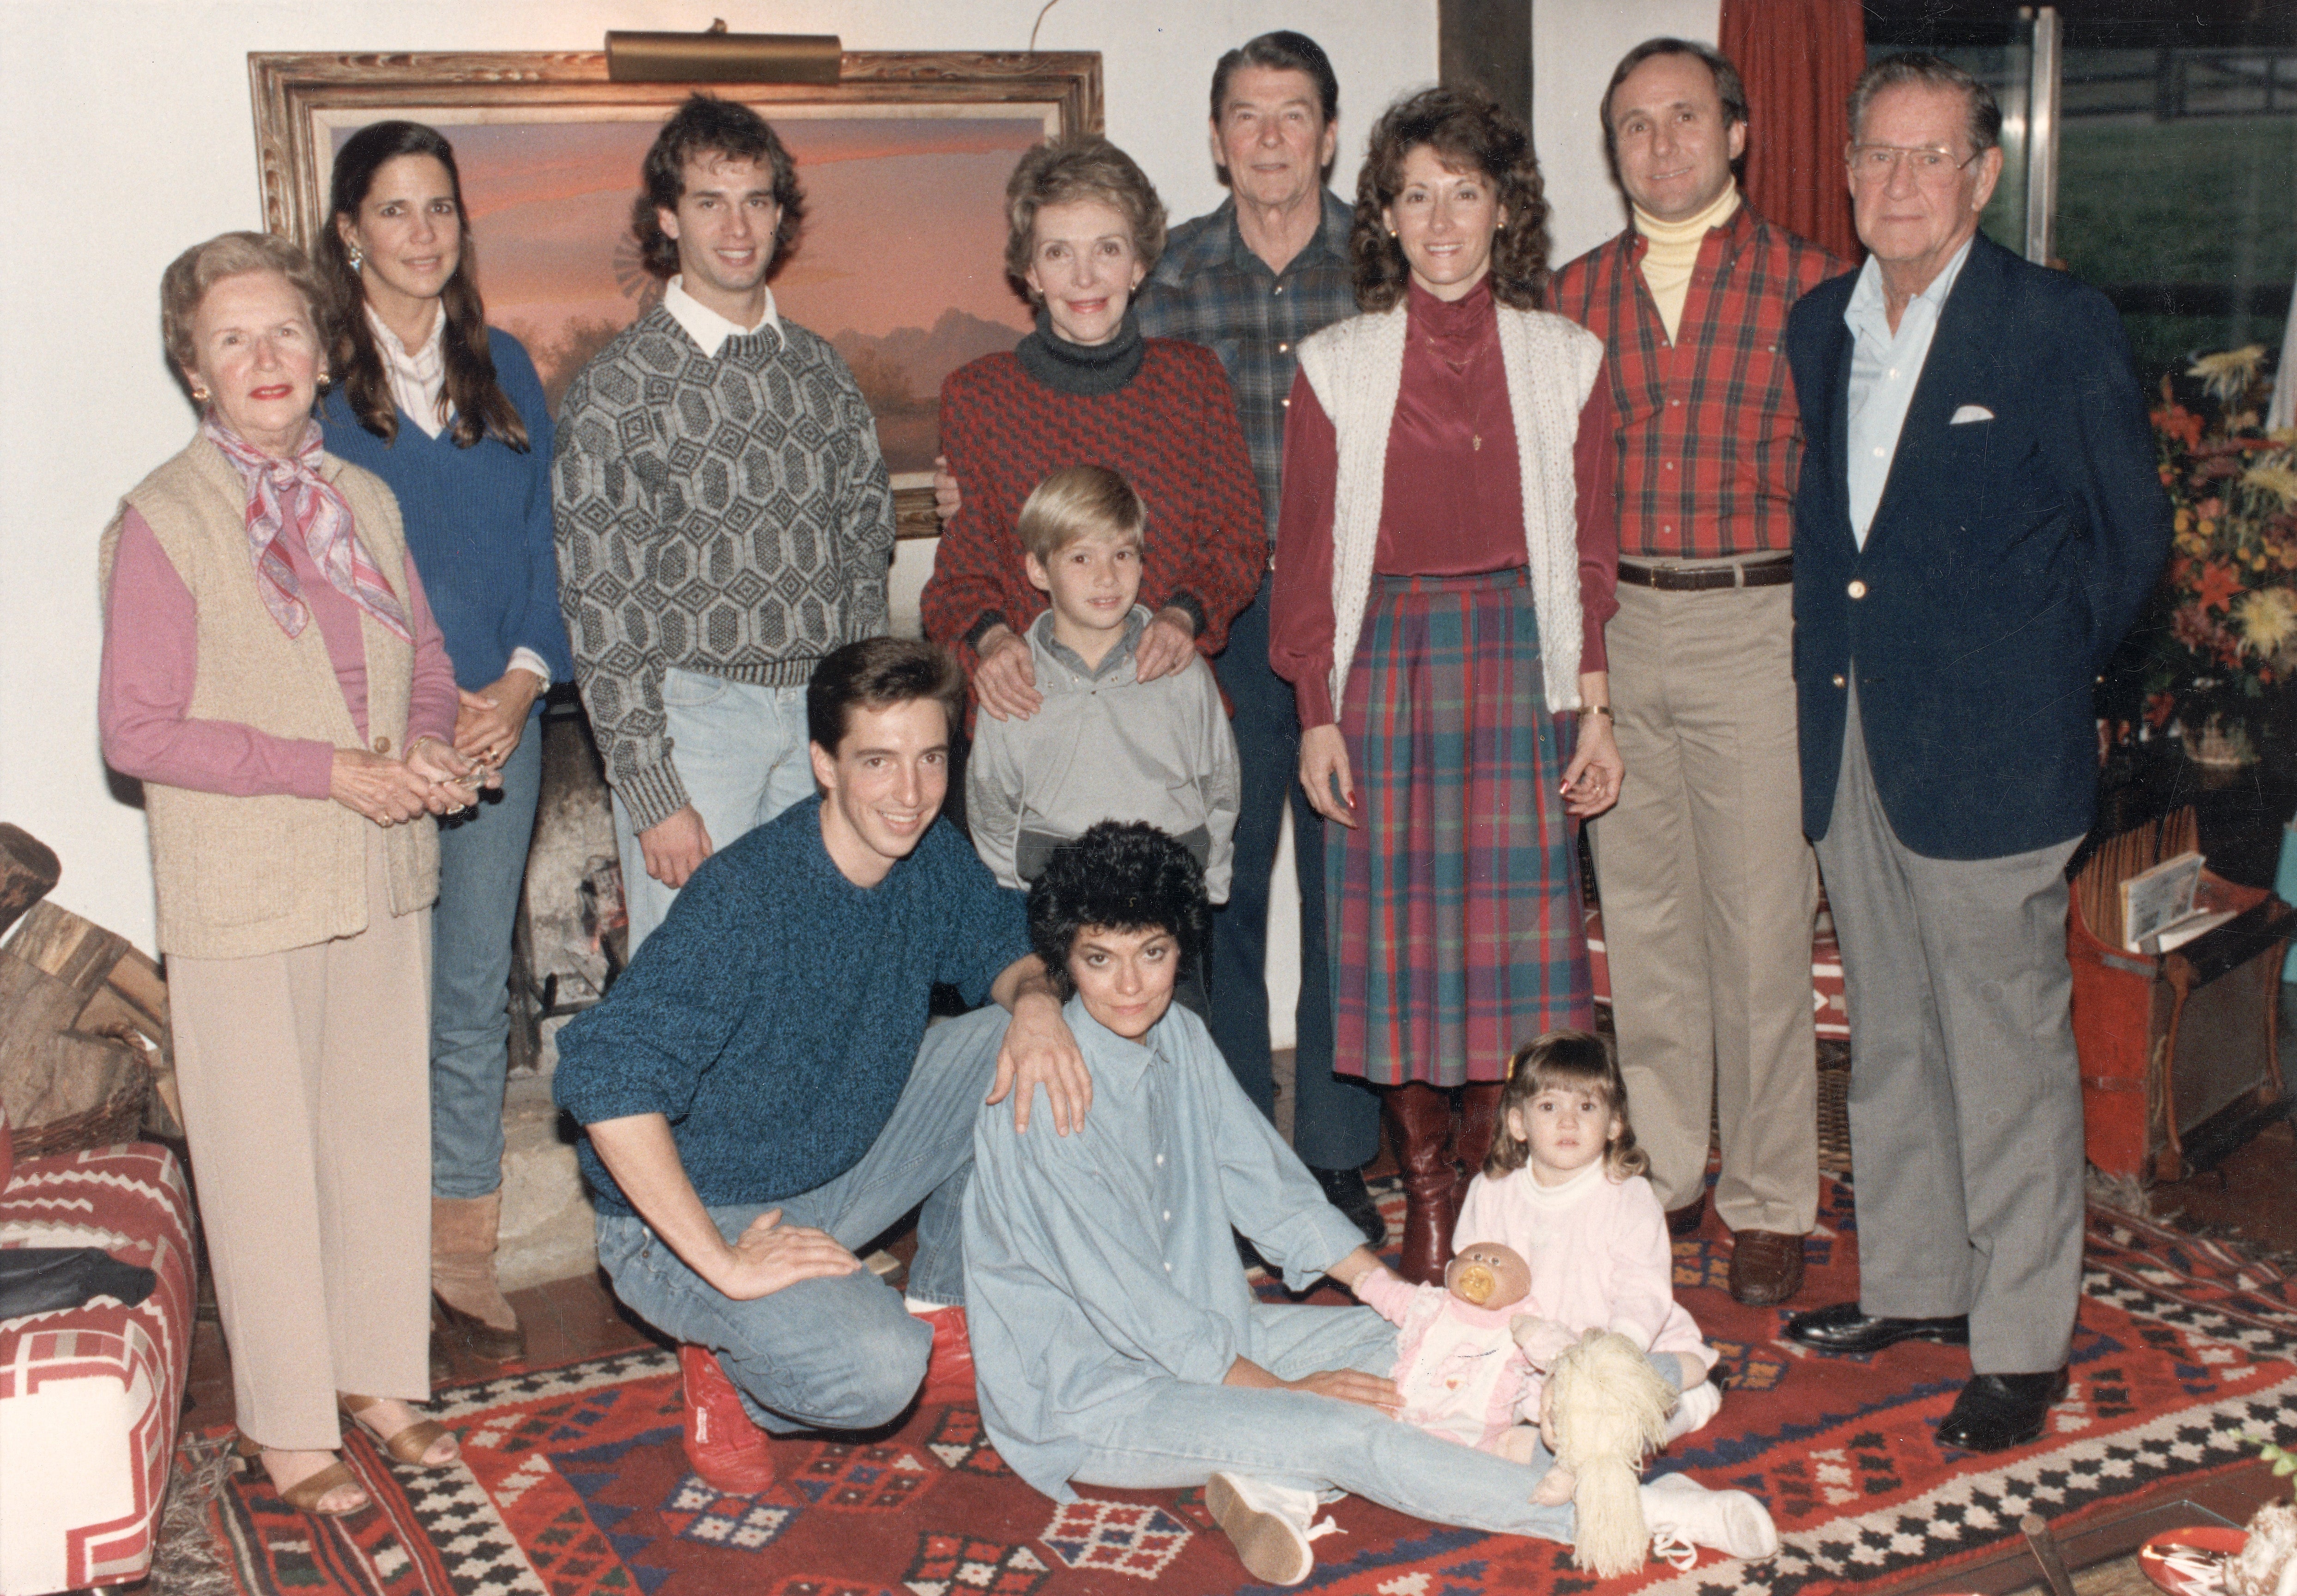 Davis, second on the left in a 1985 familyt portrait with President Ronald Reagan, mother Nancy and siblings, was often estranged because of her outspoken views